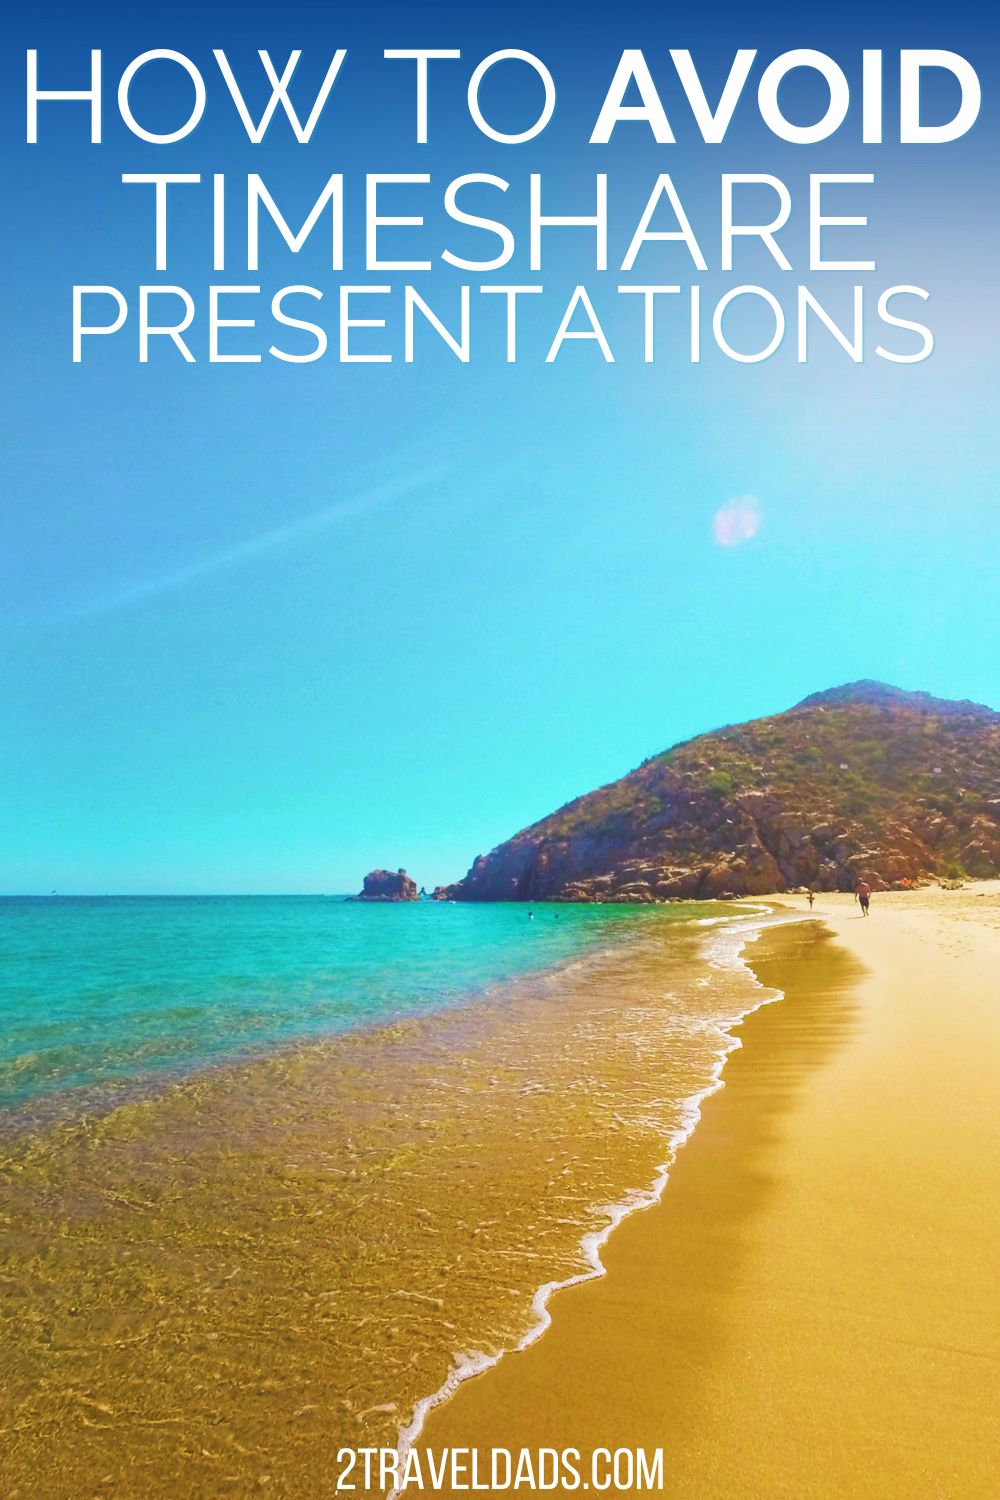 Many Mexican vacation destinations still have a lot of timeshare pitches and can easily have a negative impact on your trip. Here's how to avoid timeshare presentations, or if you do choose to participate, how to navigate through them swiftly.